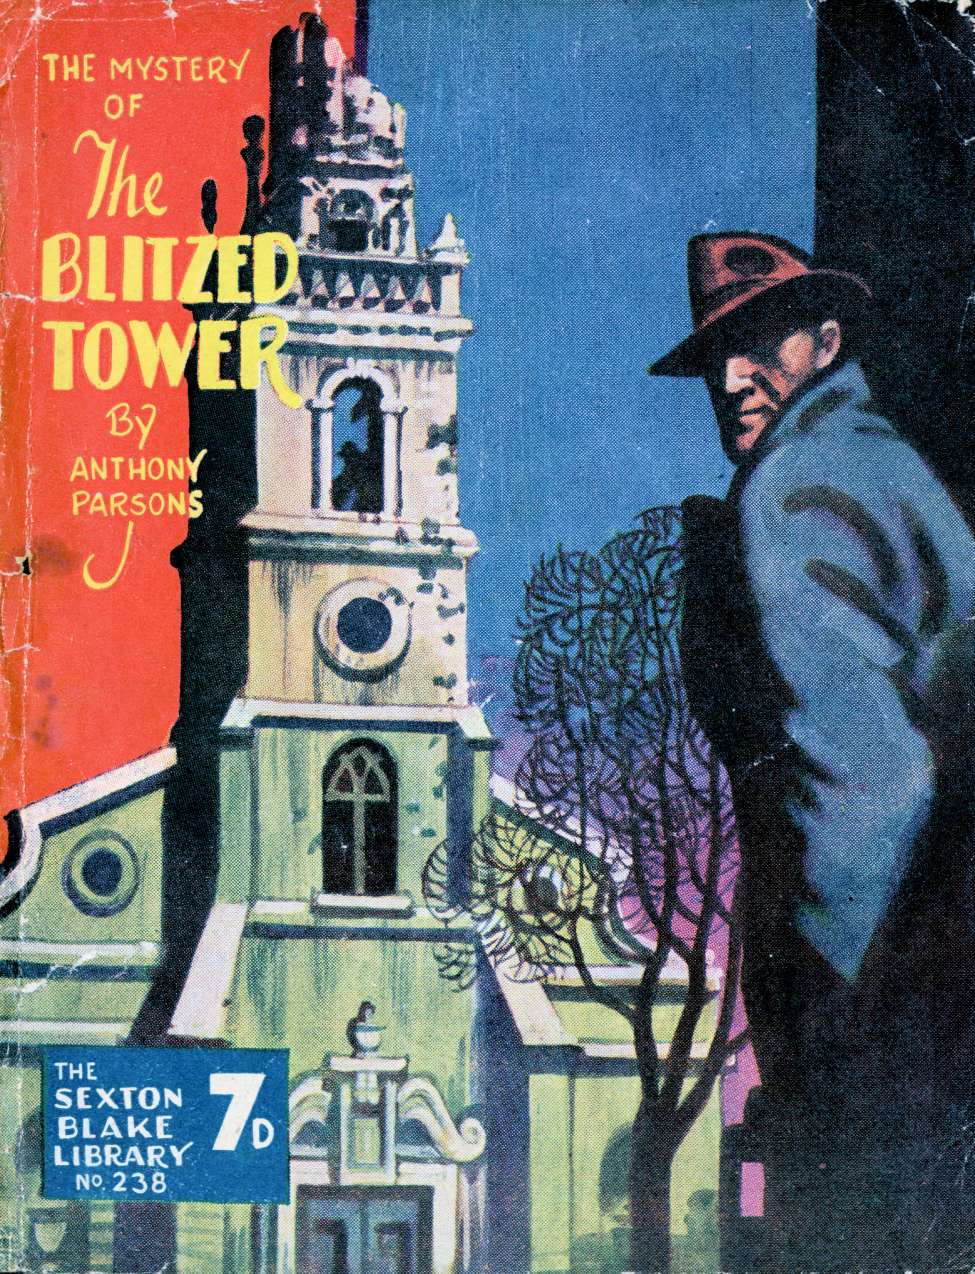 Book Cover For Sexton Blake Library S3 238 - The Mystery Of The Blitzed Tower